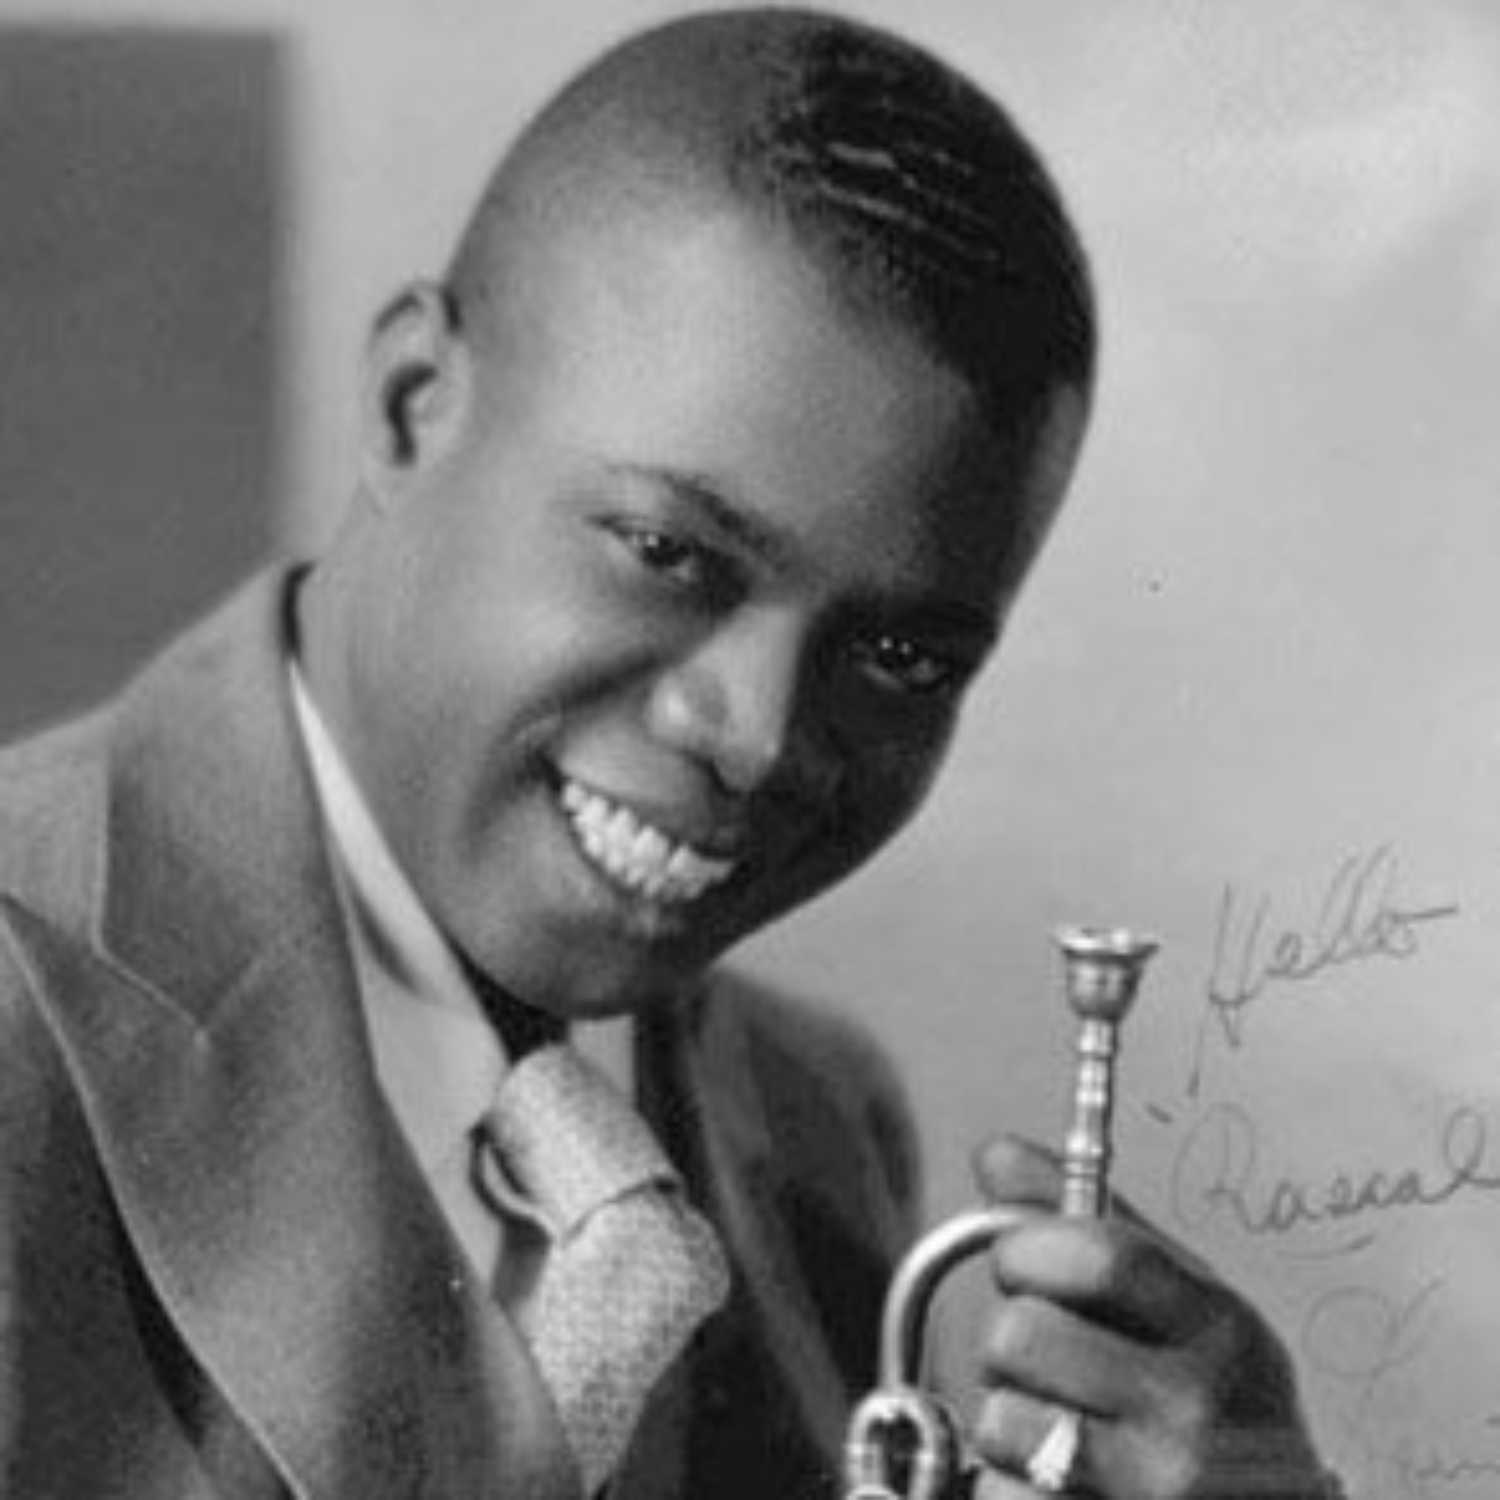 Early Louis Armstrong, 1923-1930.